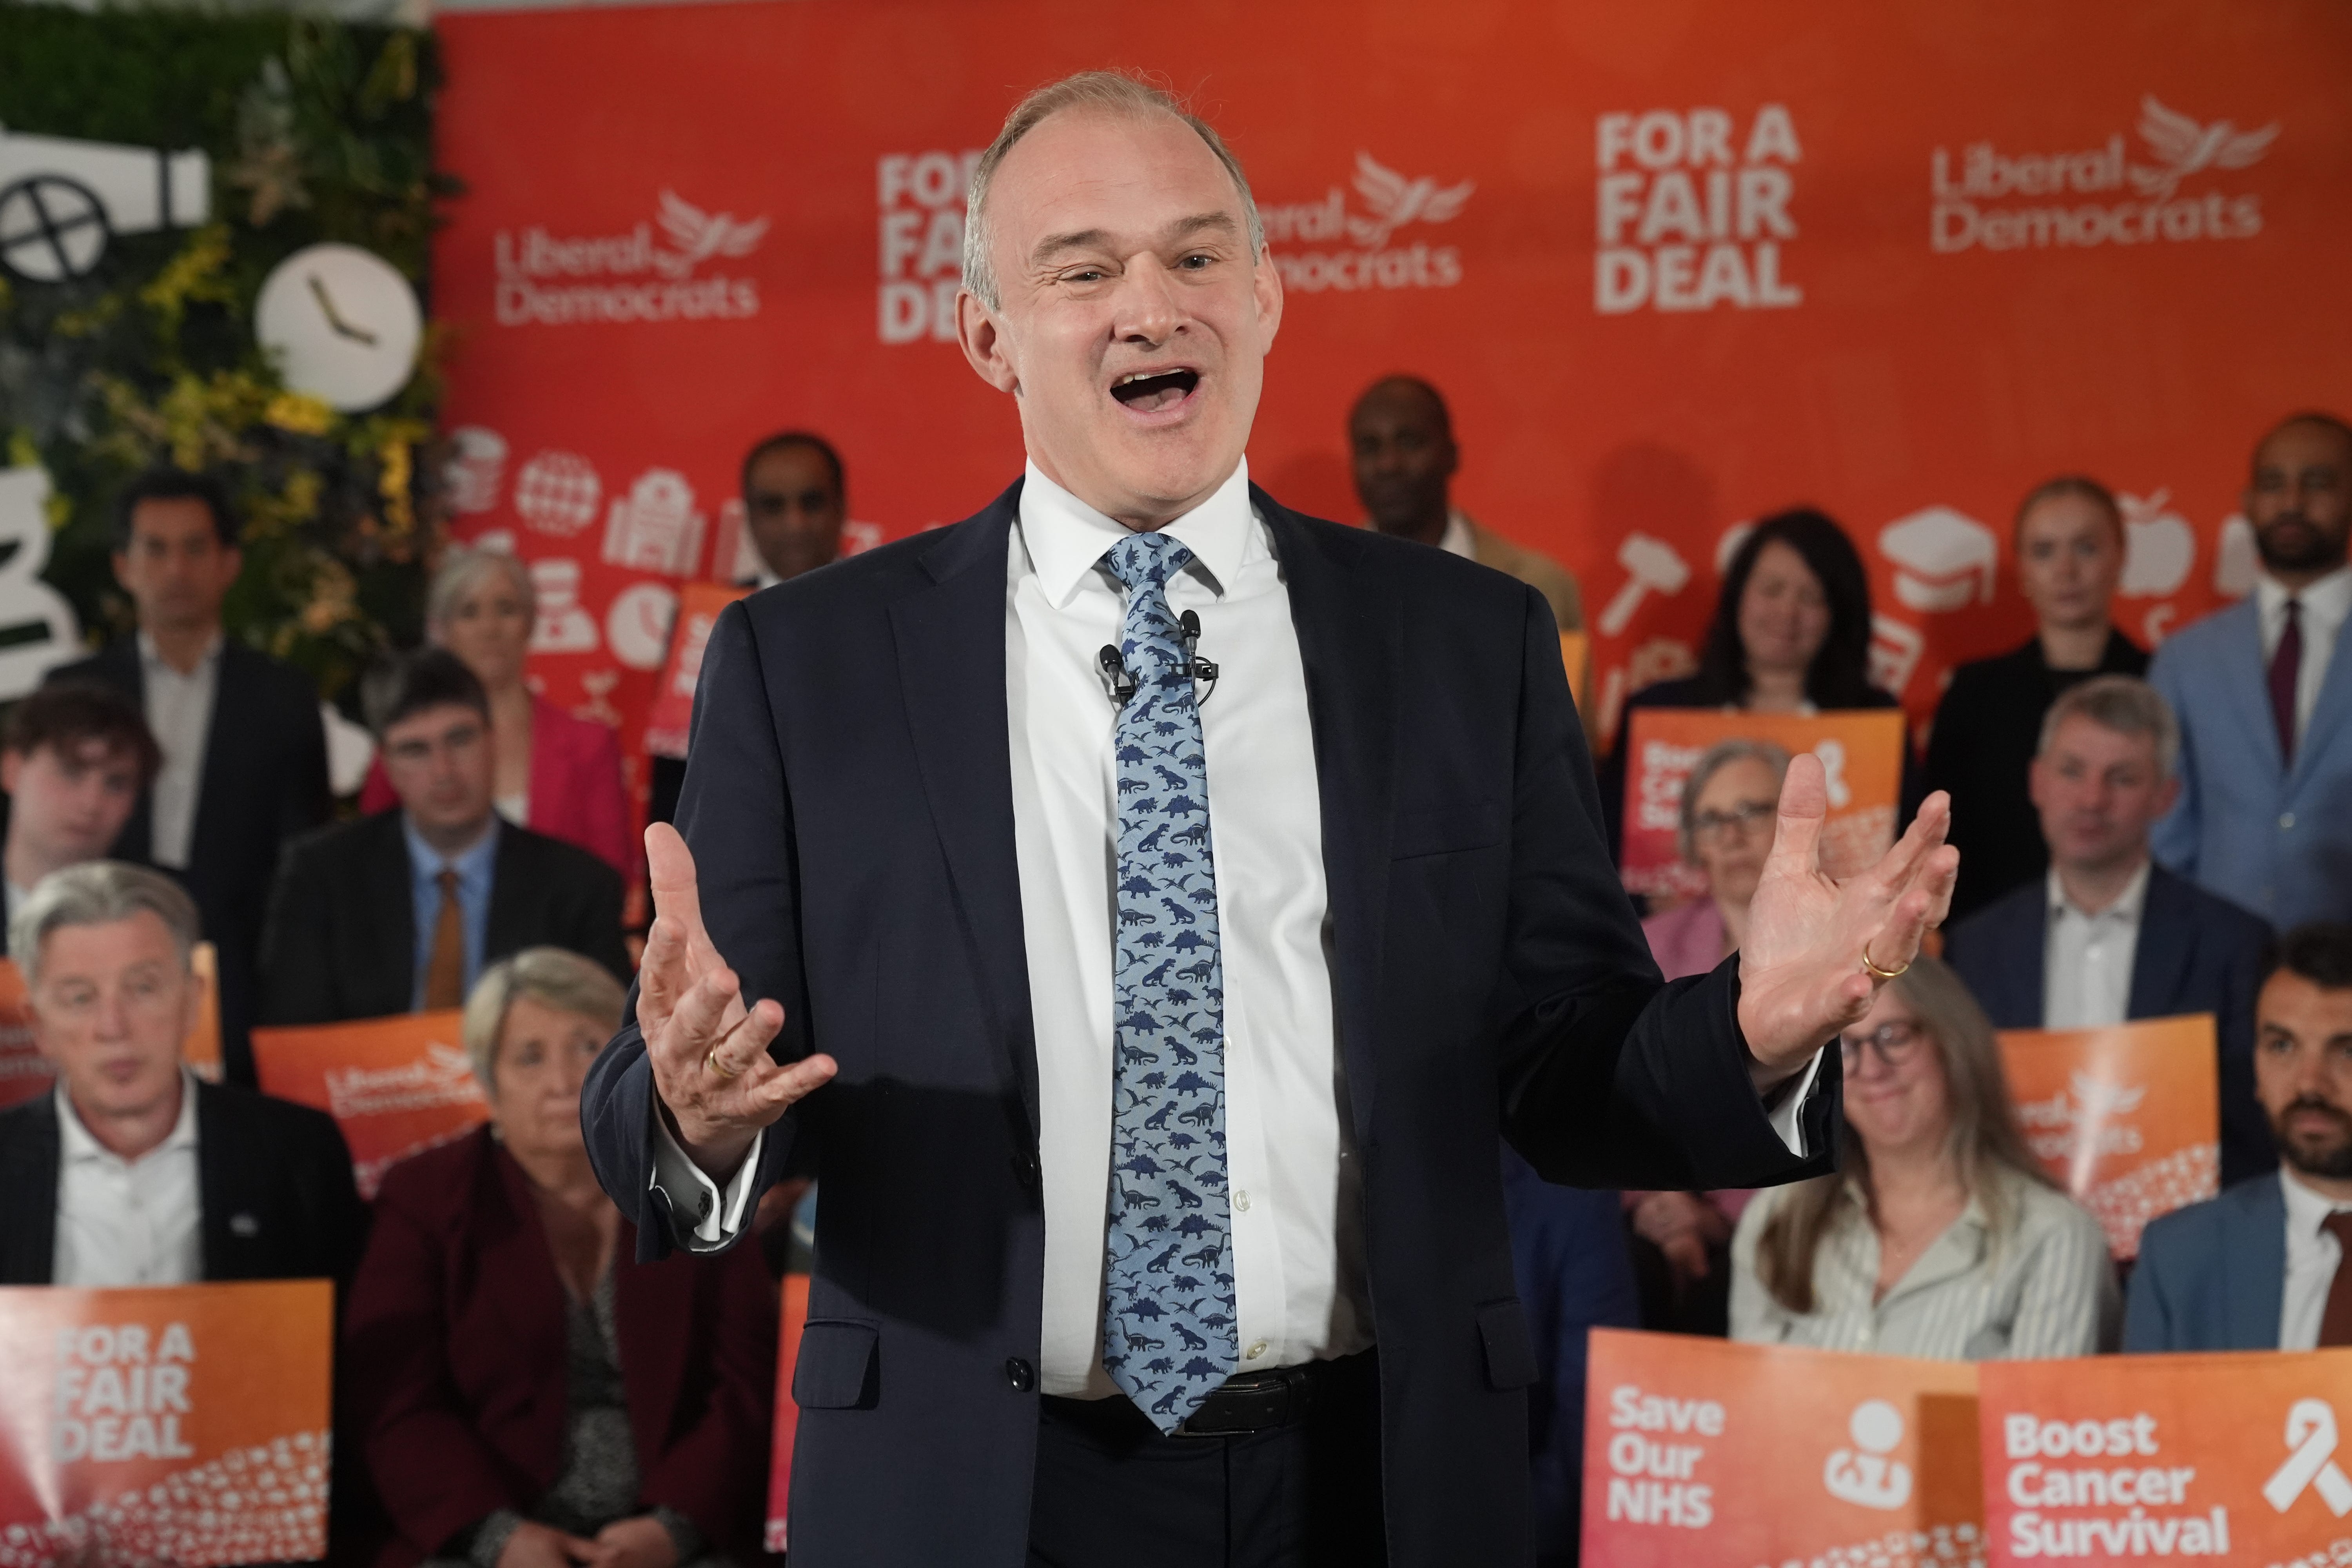 Liberal Democrat leader Ed Davey stressed his party has ‘put health and care at the heart’ of its manifesto, but the document also includes the aim to ‘fix the UK’s broken relationship with Europe’